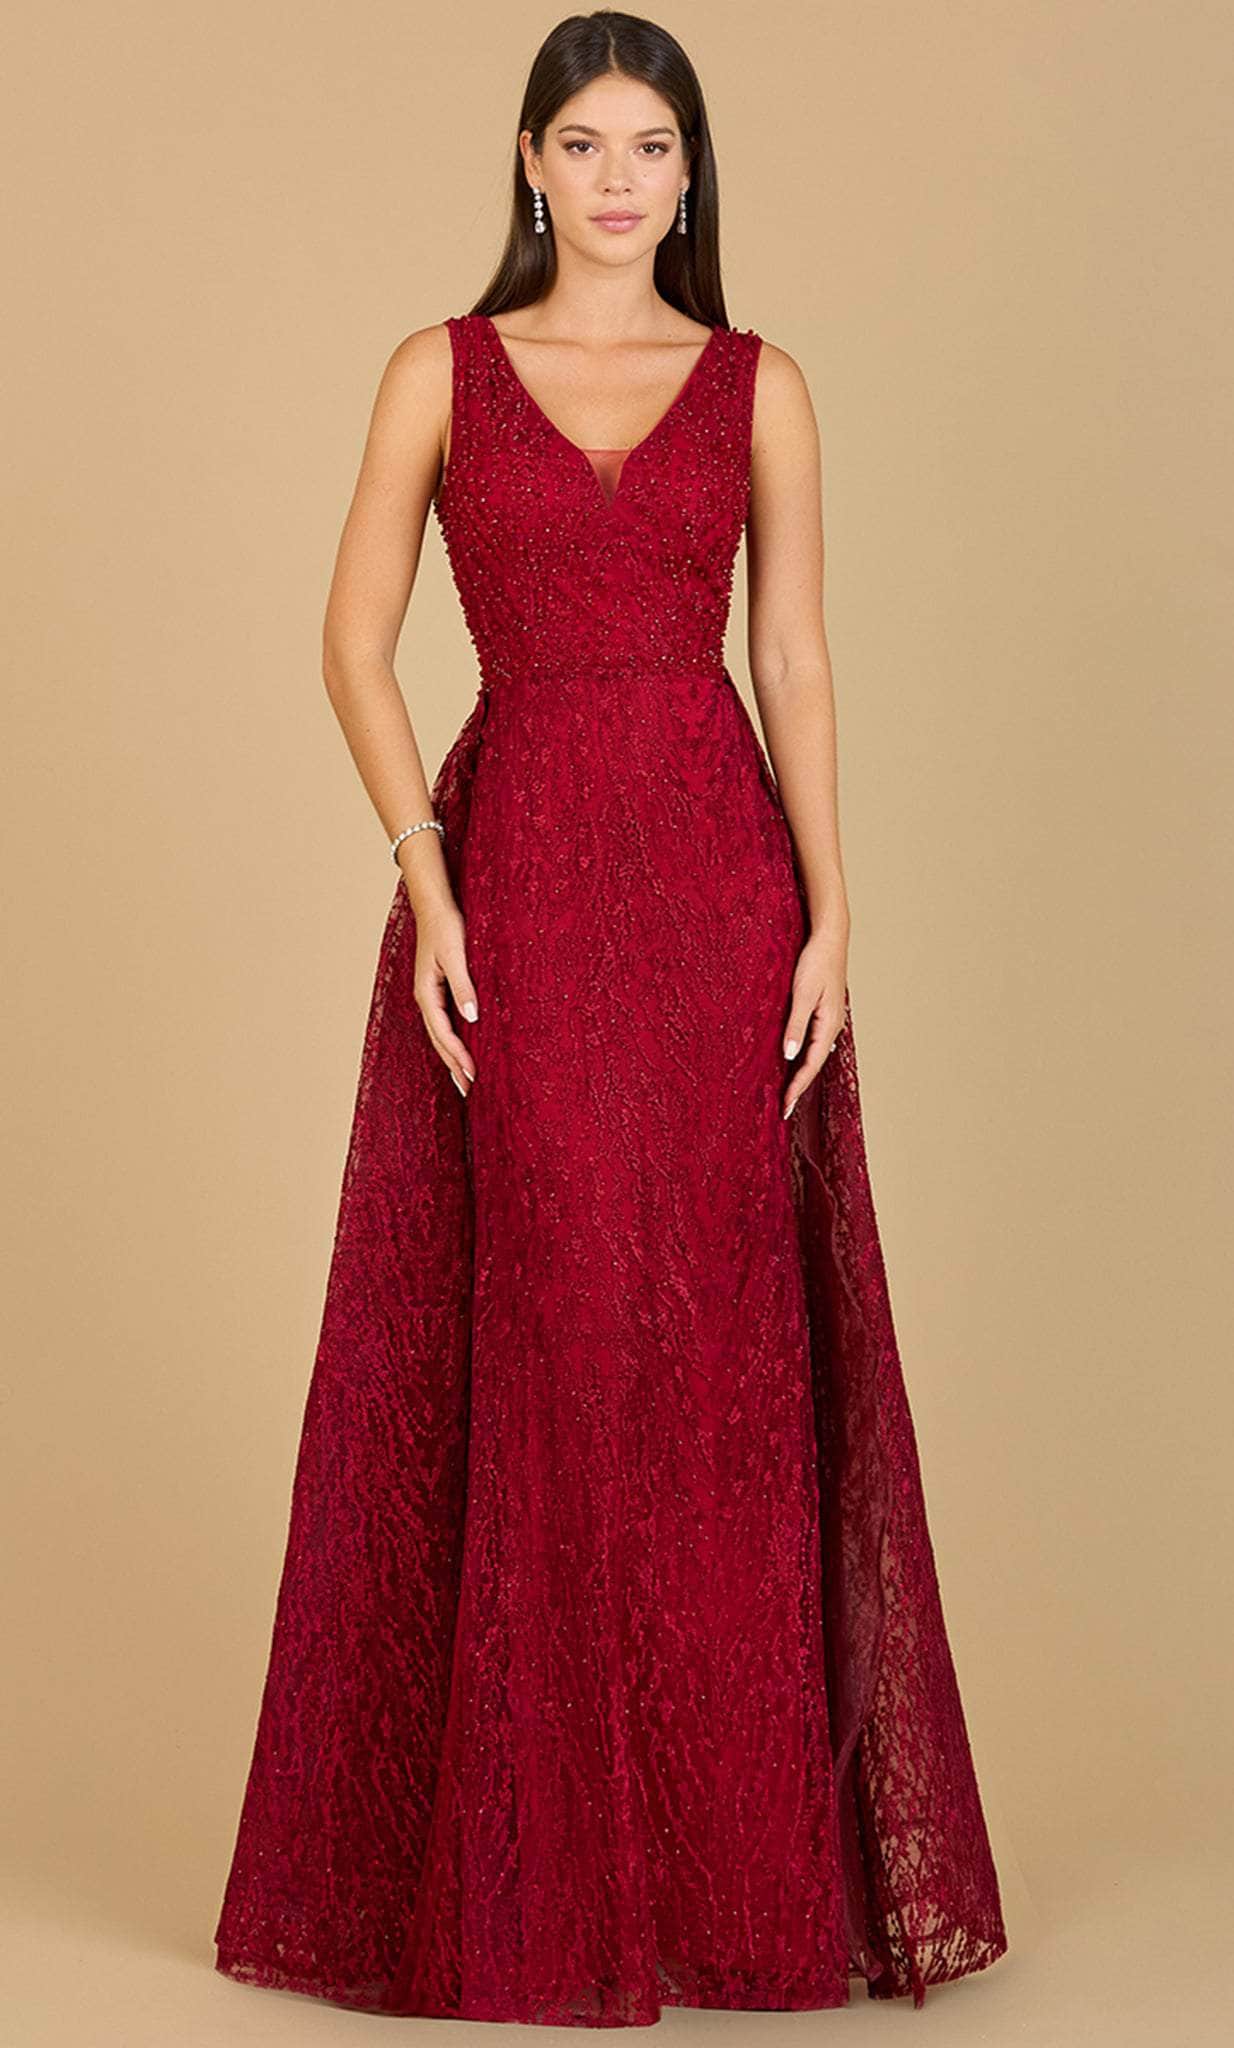 Image of Lara Dresses 29197 - Plunging V-Neck Lace Evening Gown